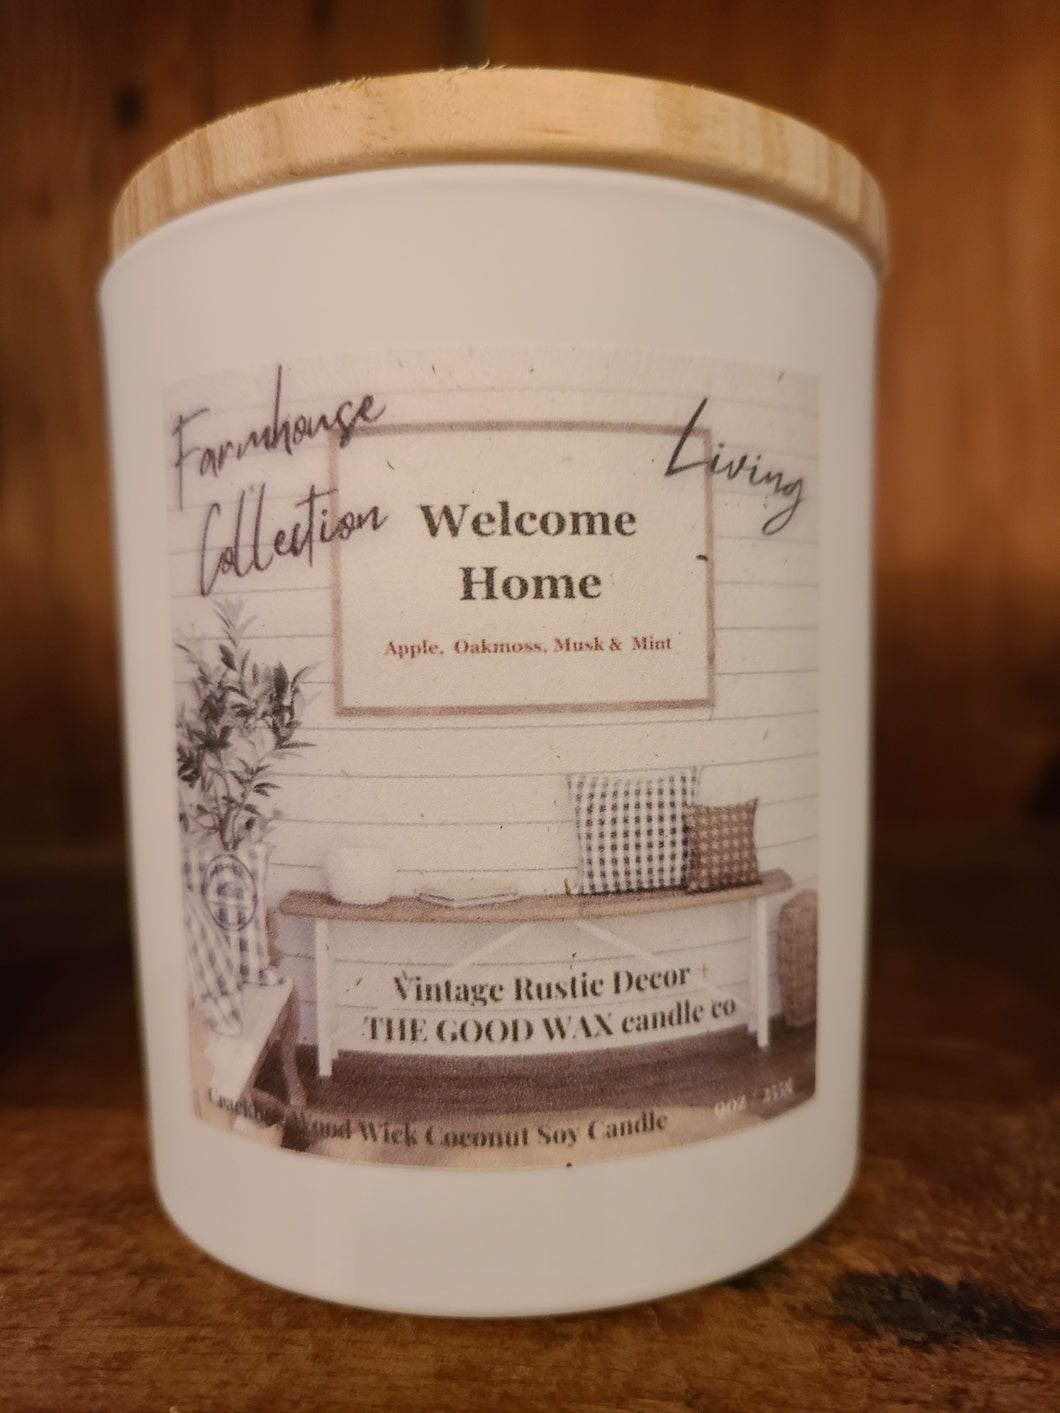 Welcome Home - Farmhouse Collection Living